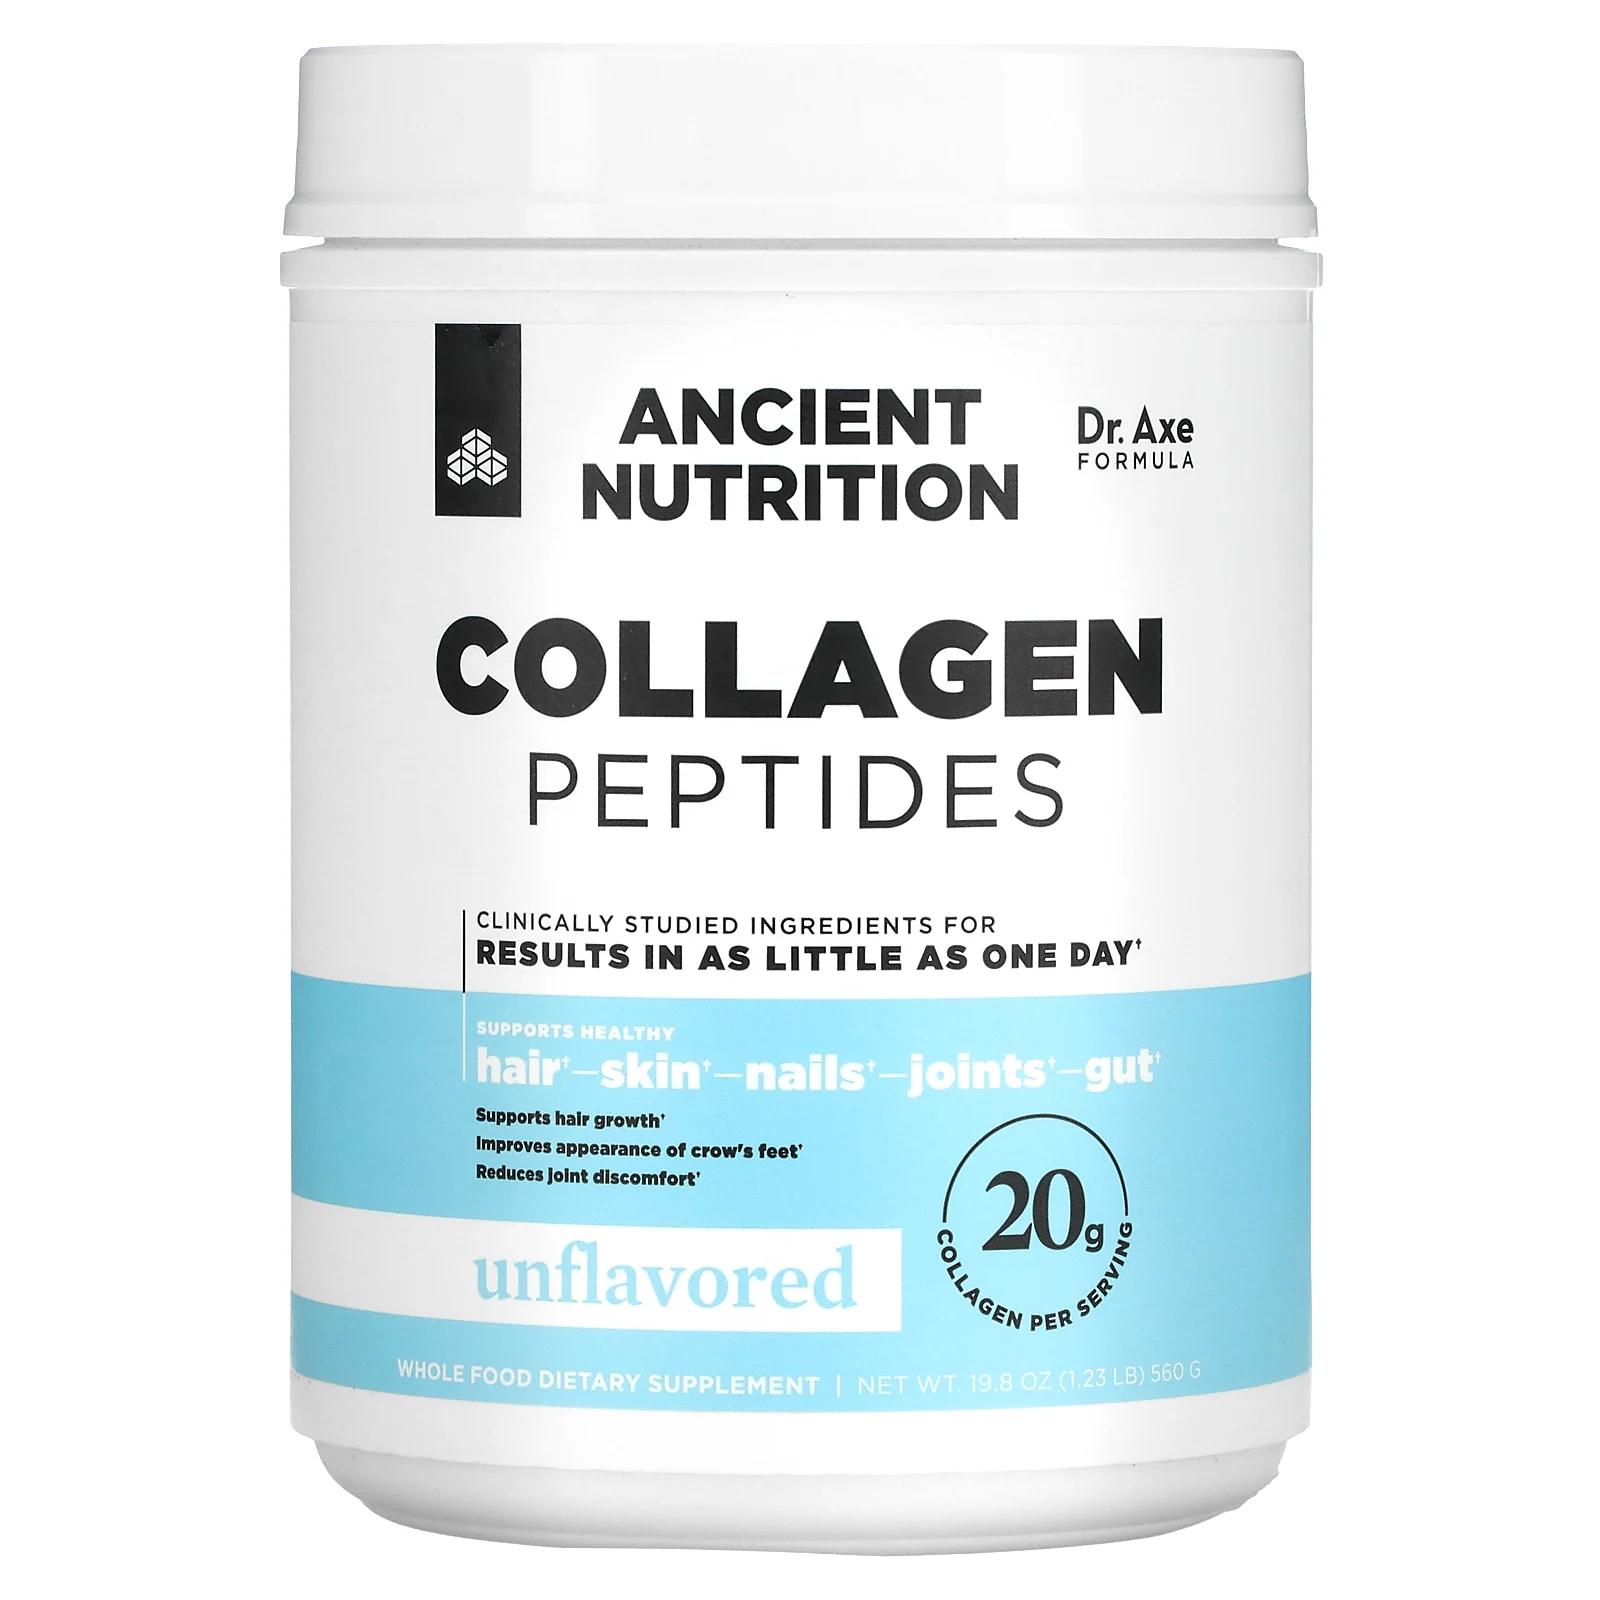 Dr. Axe / Ancient Nutrition Collagen Peptides Unflavored 19.8 oz (560 g)